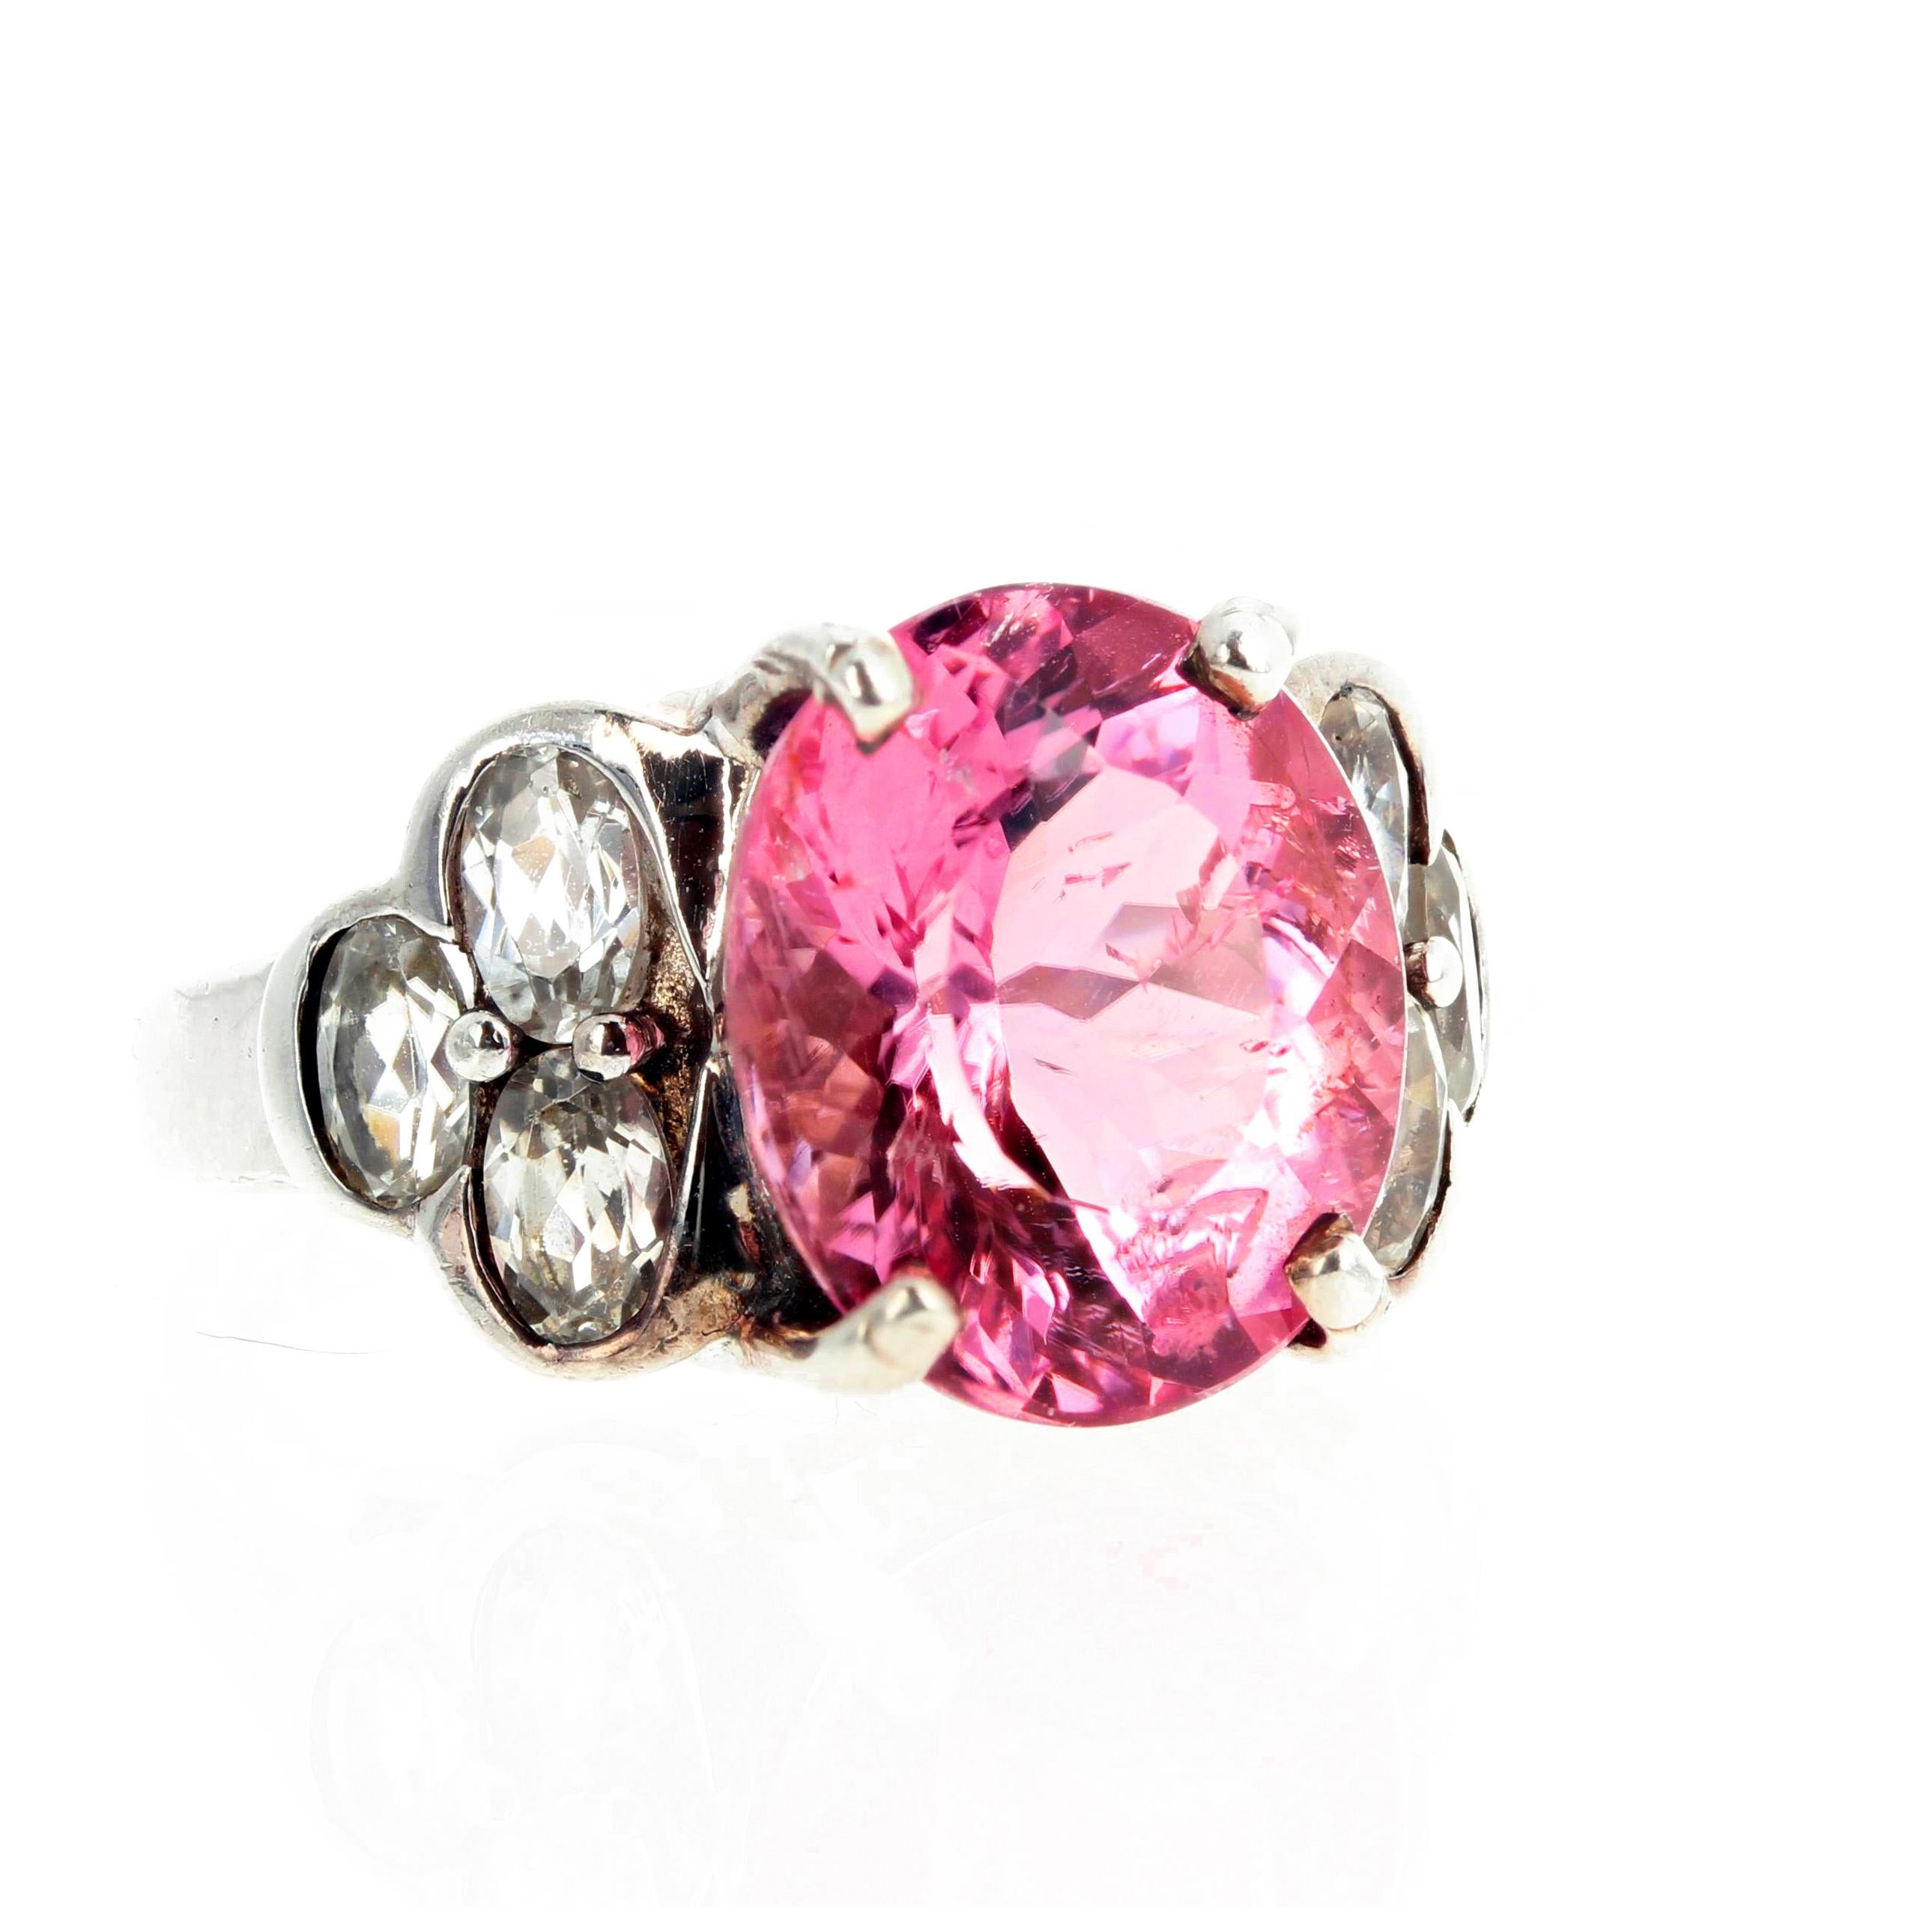 Mixed Cut AJD Beautiful 4 Cts Sparkling Pink Tourmaline & Silver Quartz Silver Ring For Sale